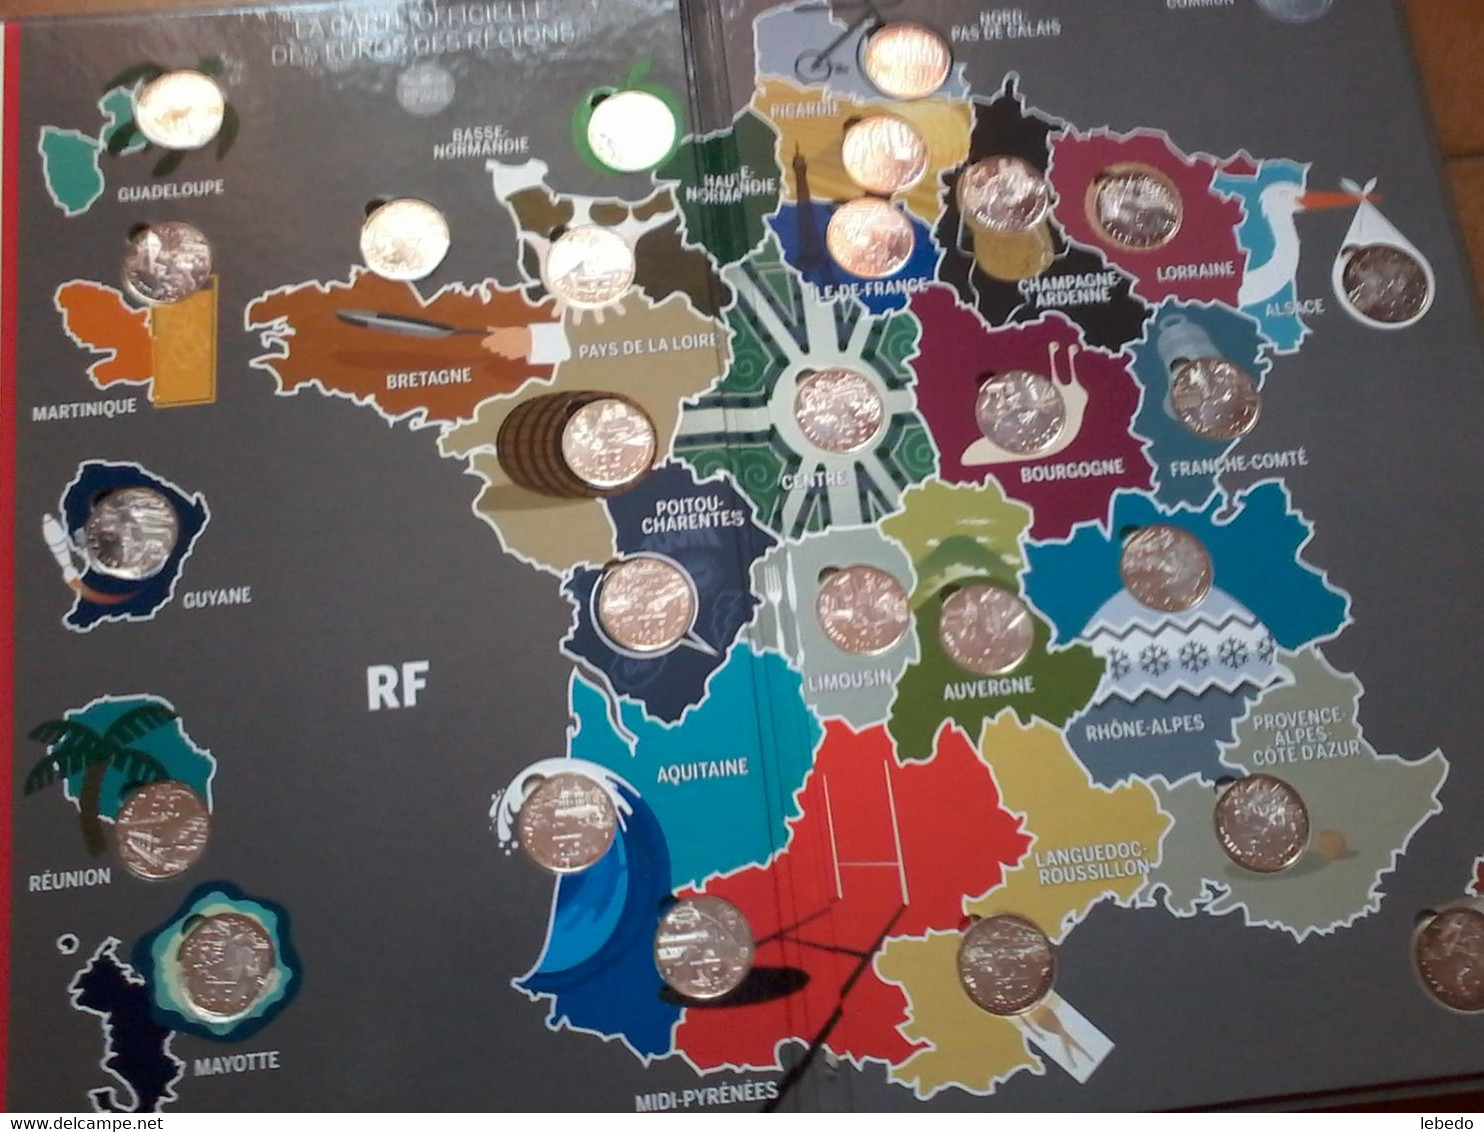 SERIES EUROS DES REGIONS - Collections